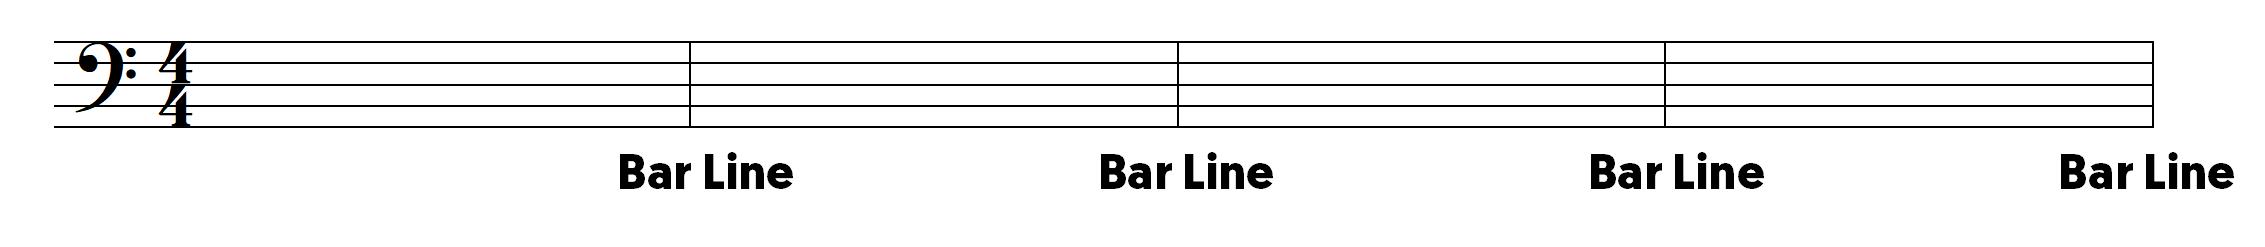 music bar lines vector free